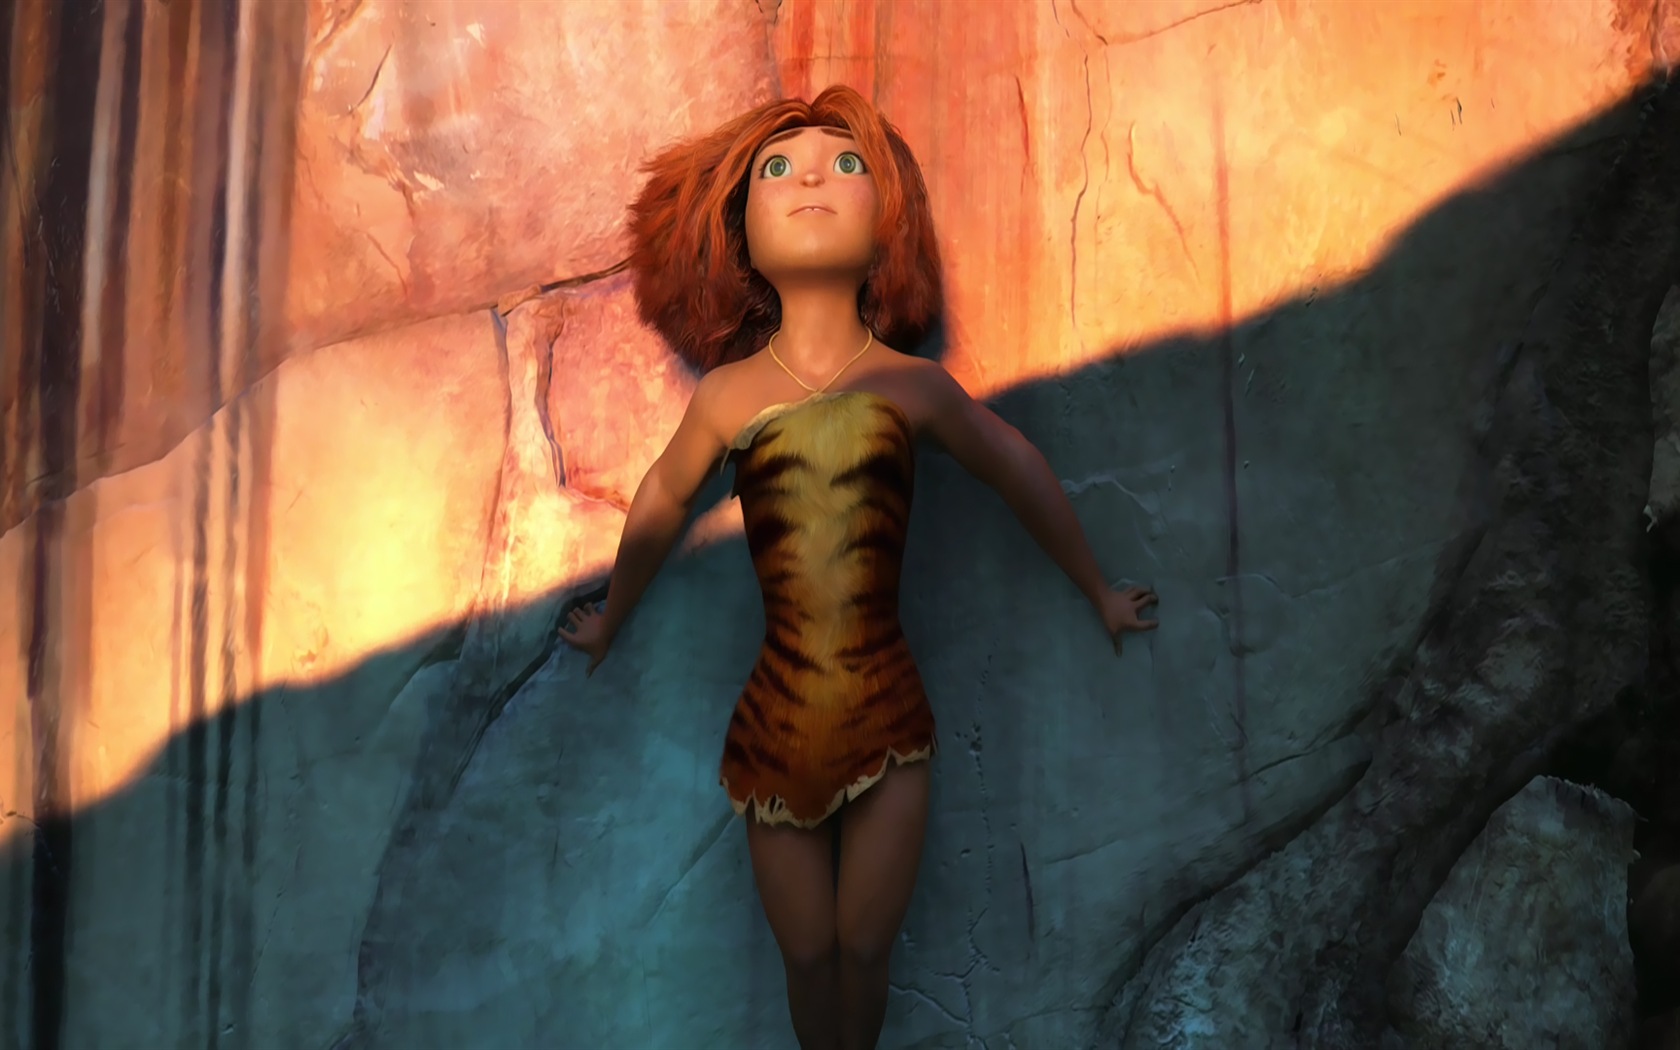 The Croods HD movie wallpapers #2 - 1680x1050